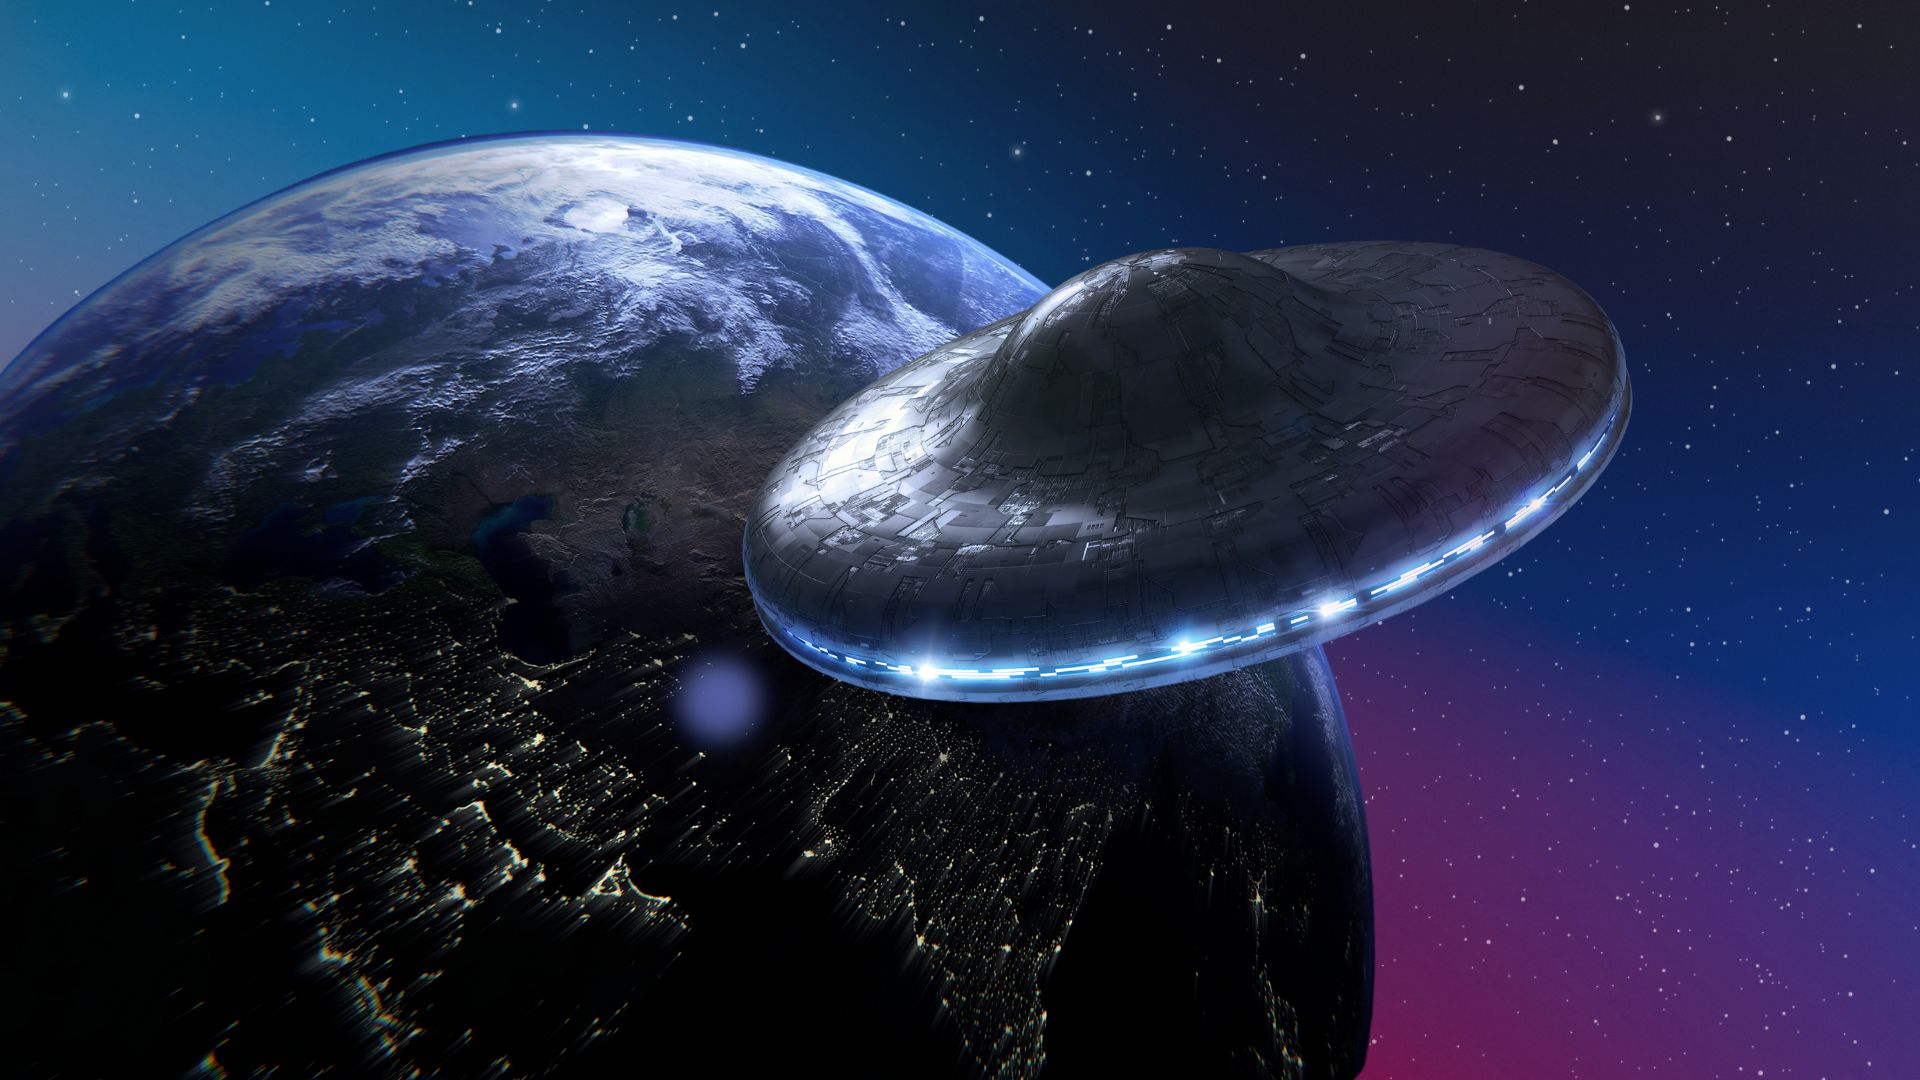 There are more things in Heaven and Earth, Horatio, than are dreamt of on World UFO Day